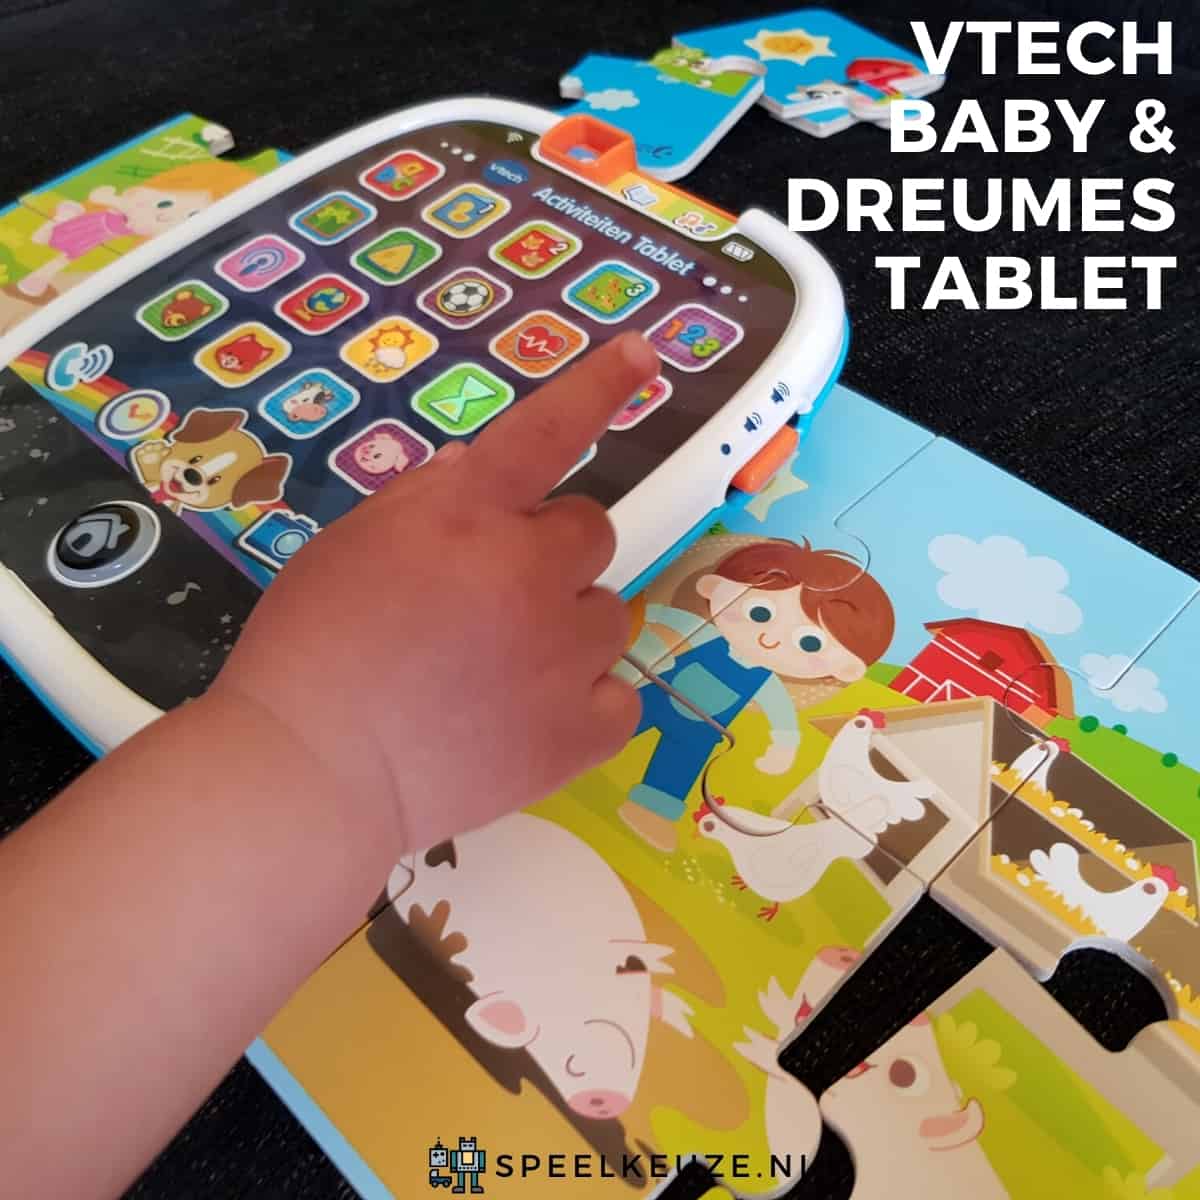 Best for baby and toddler: Vtech activity tablet